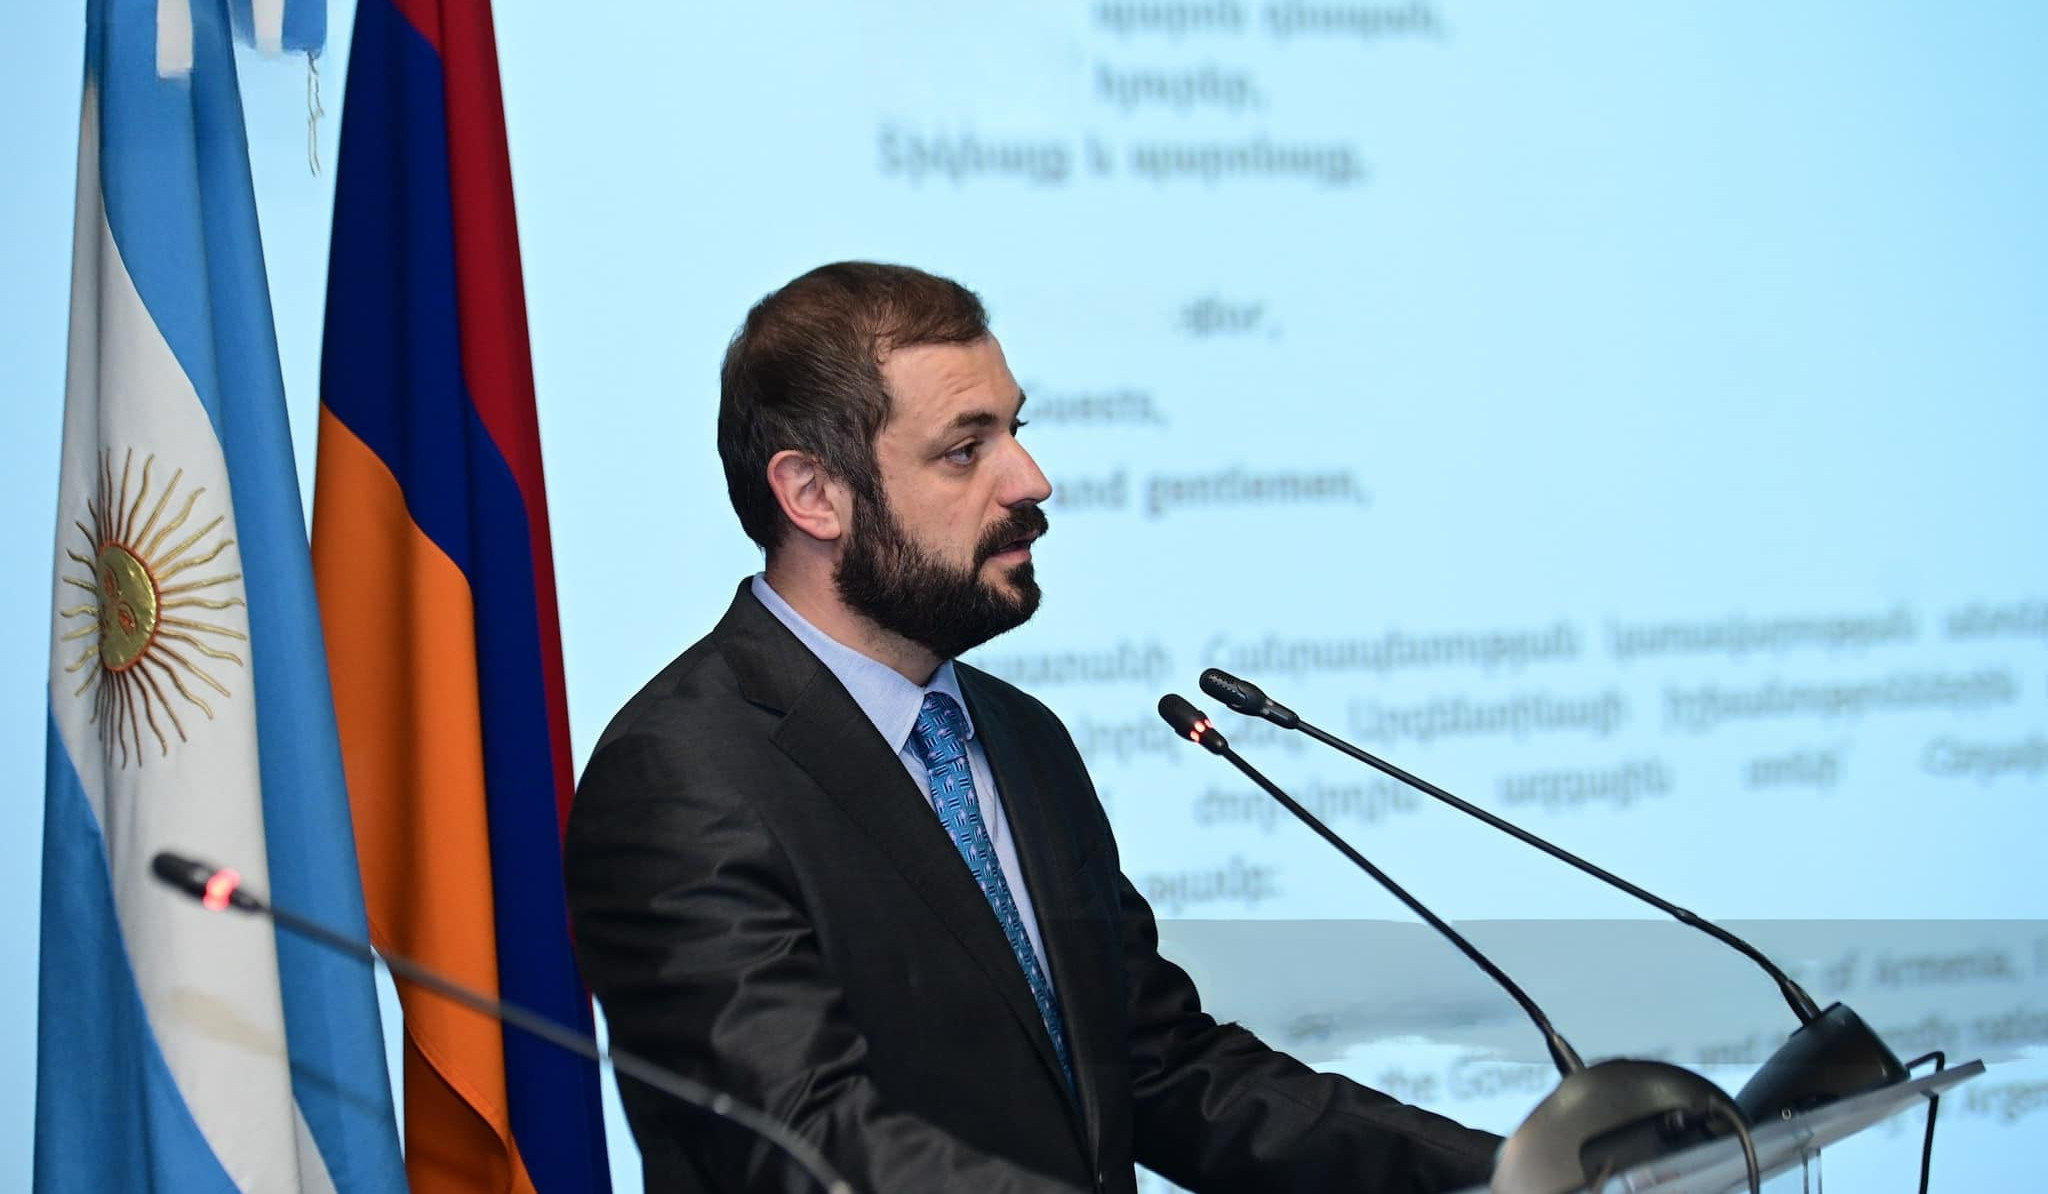 Argentina is one of important investment partners of Armenia, 5th largest in terms of investments in our economy: Papoyan